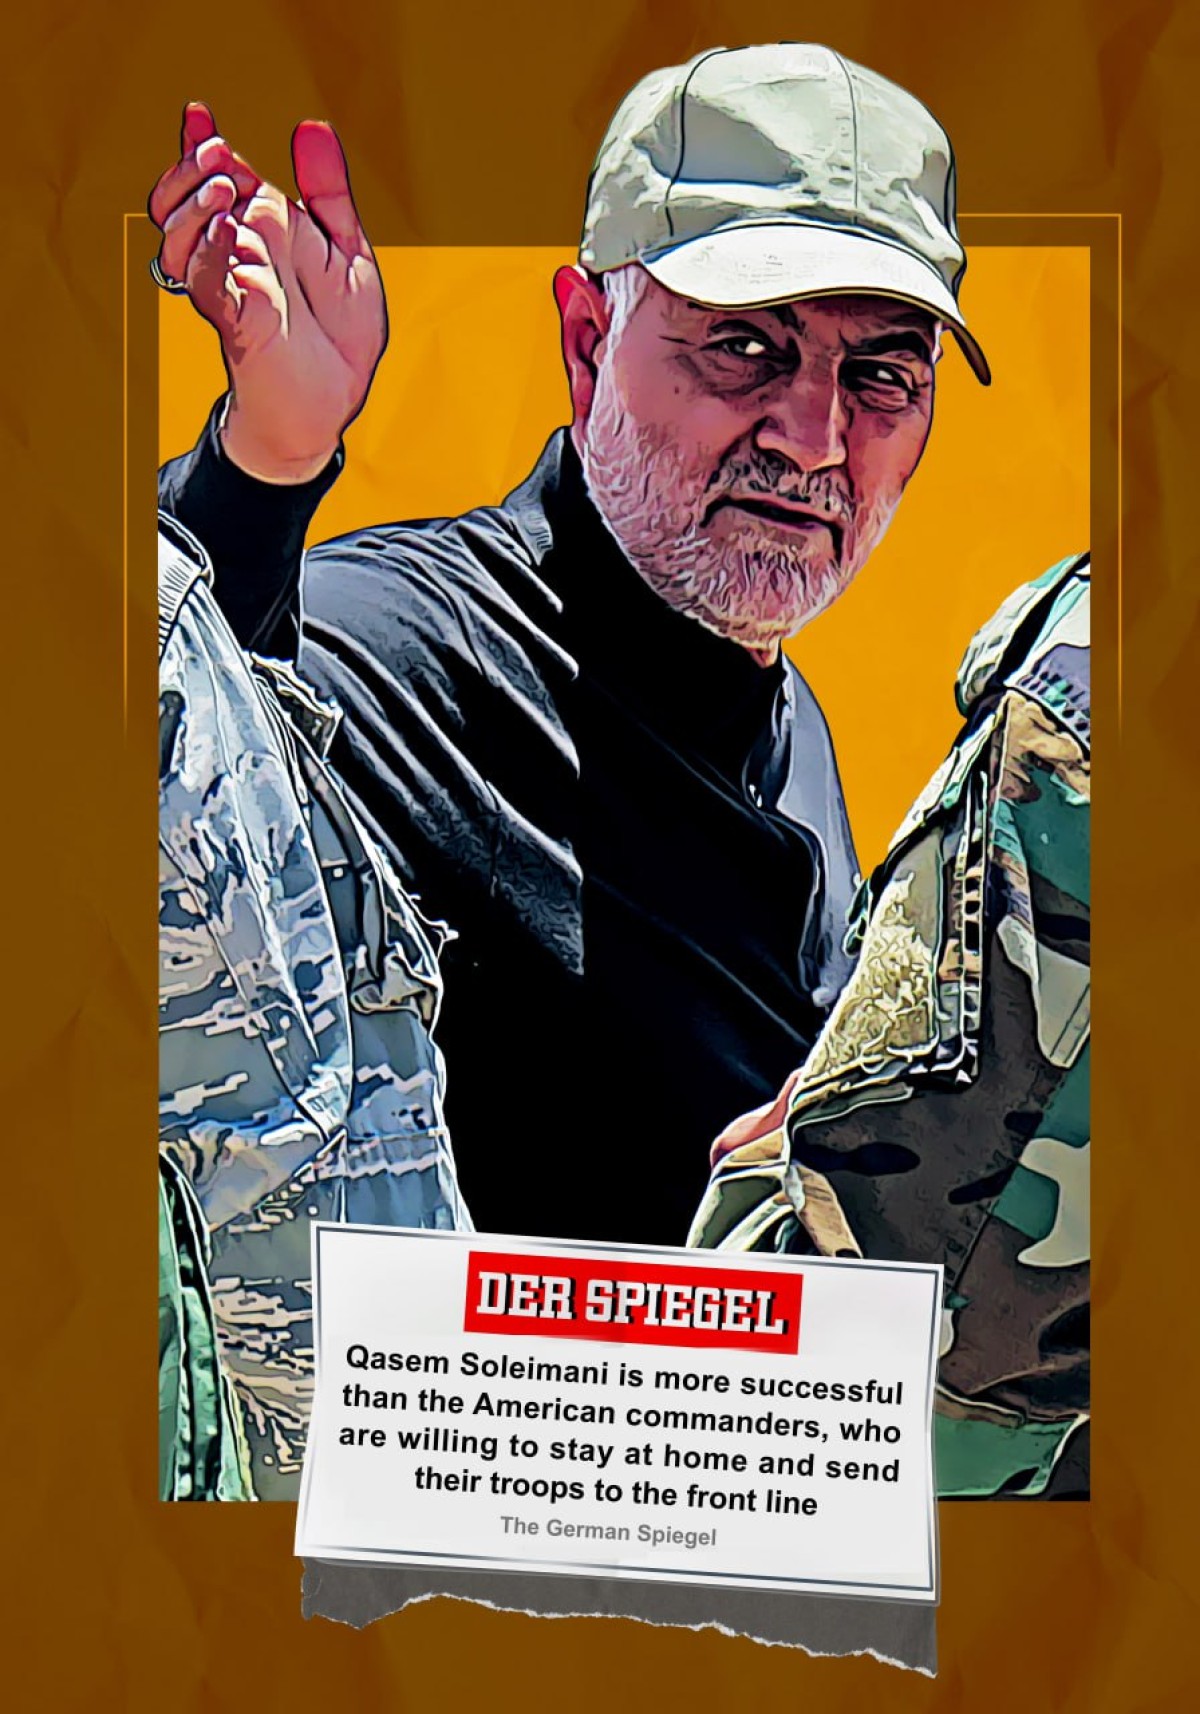 DER SPIEGEL Qasem Soleimani is more successful than the American commanders, who are willing to stay at home and send their troops to the front line